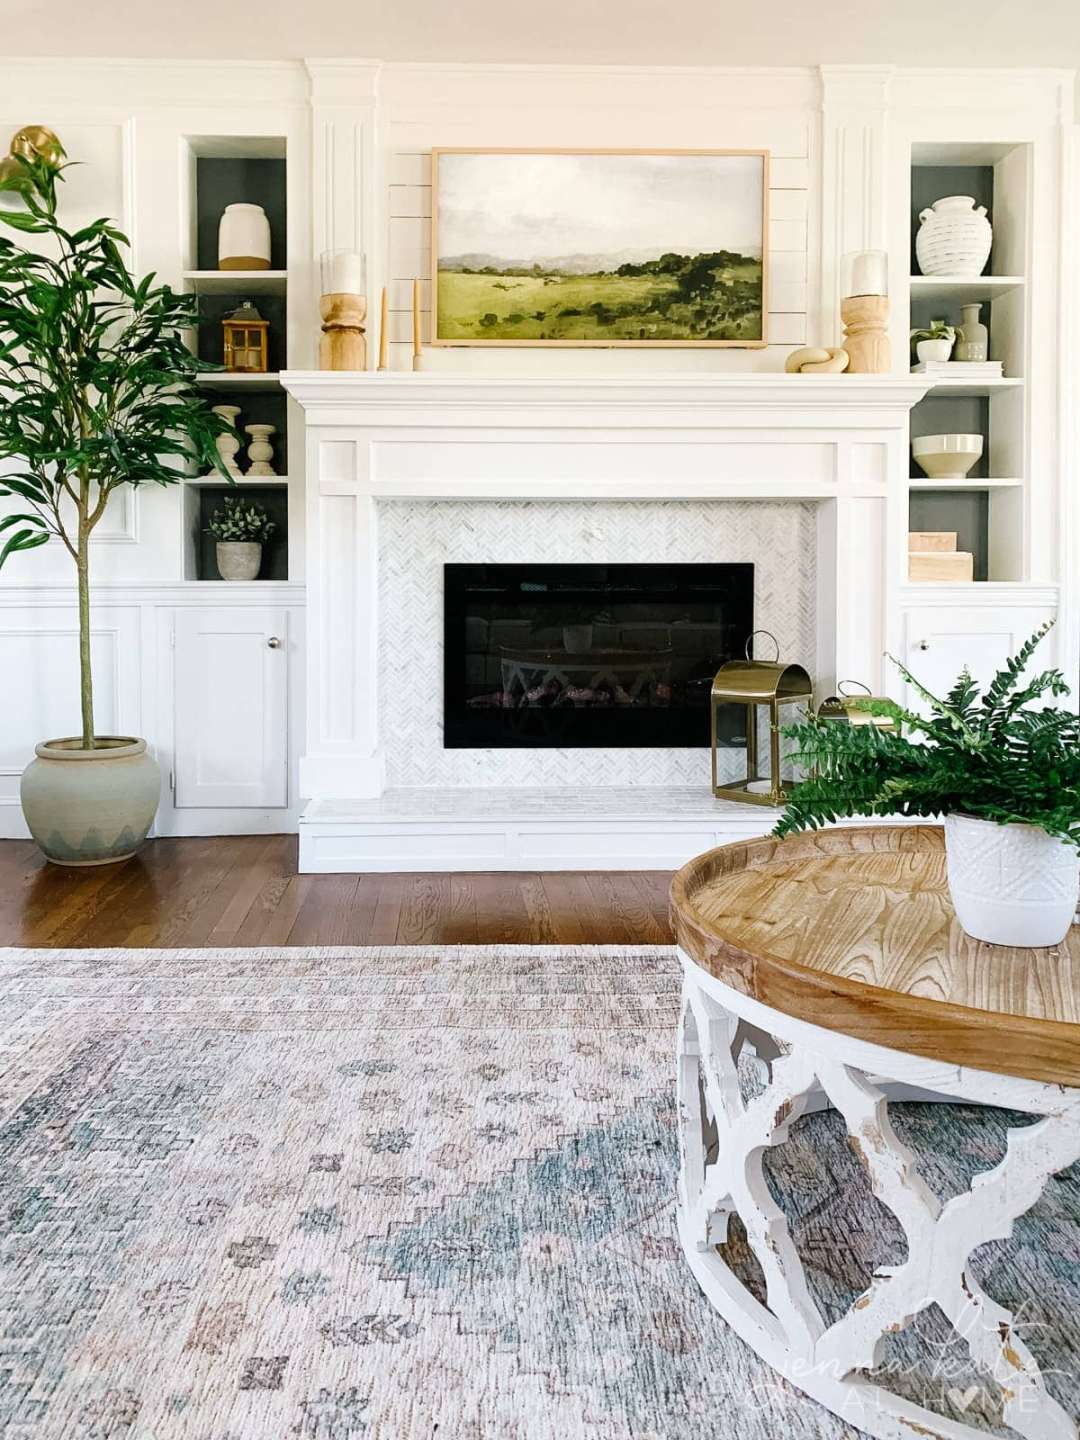 Stunning Ideas For Built Ins Around a Fireplace - Jenna Kate at